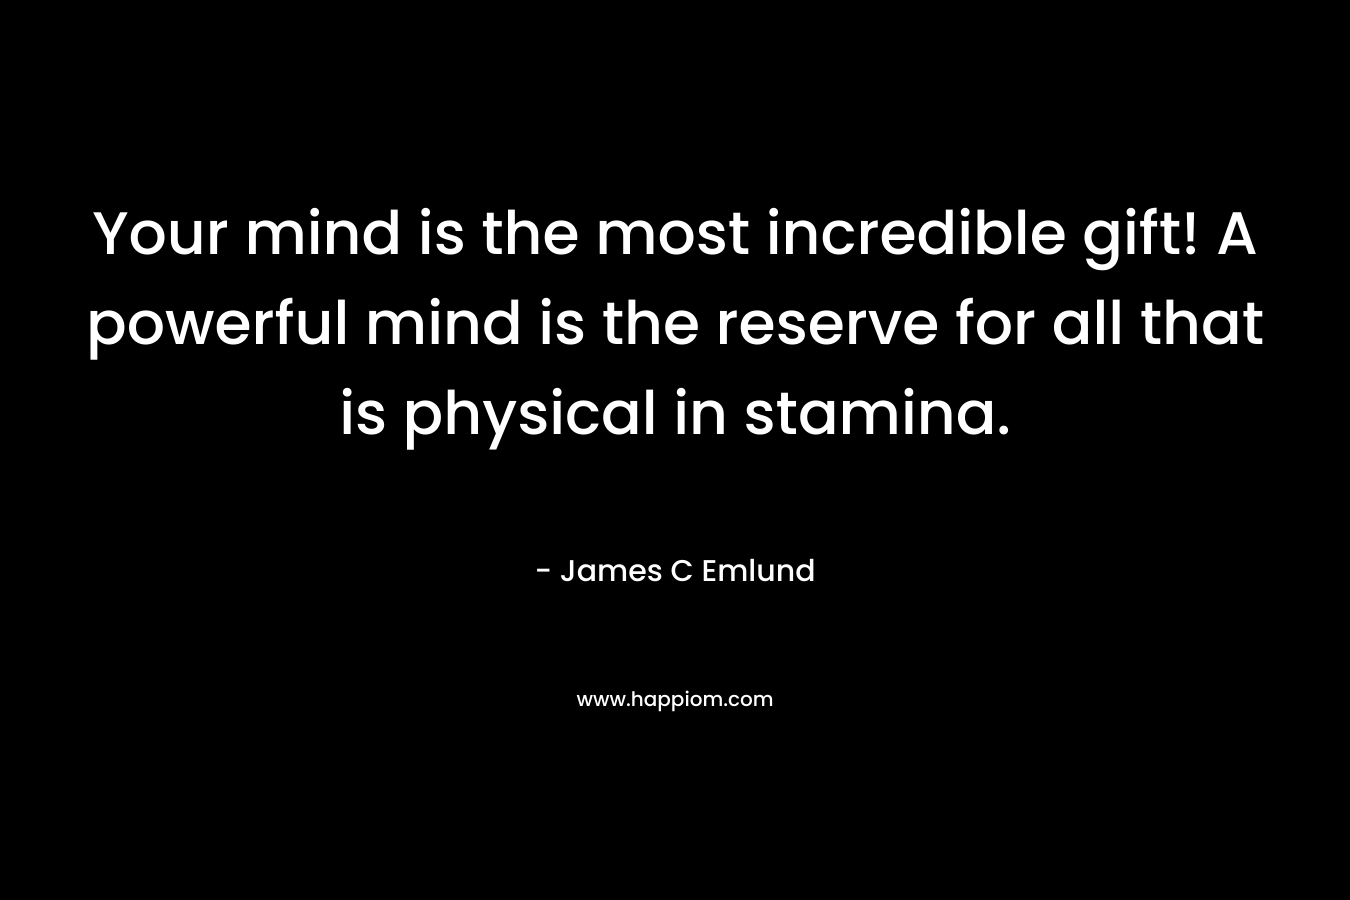 Your mind is the most incredible gift! A powerful mind is the reserve for all that is physical in stamina. – James C Emlund